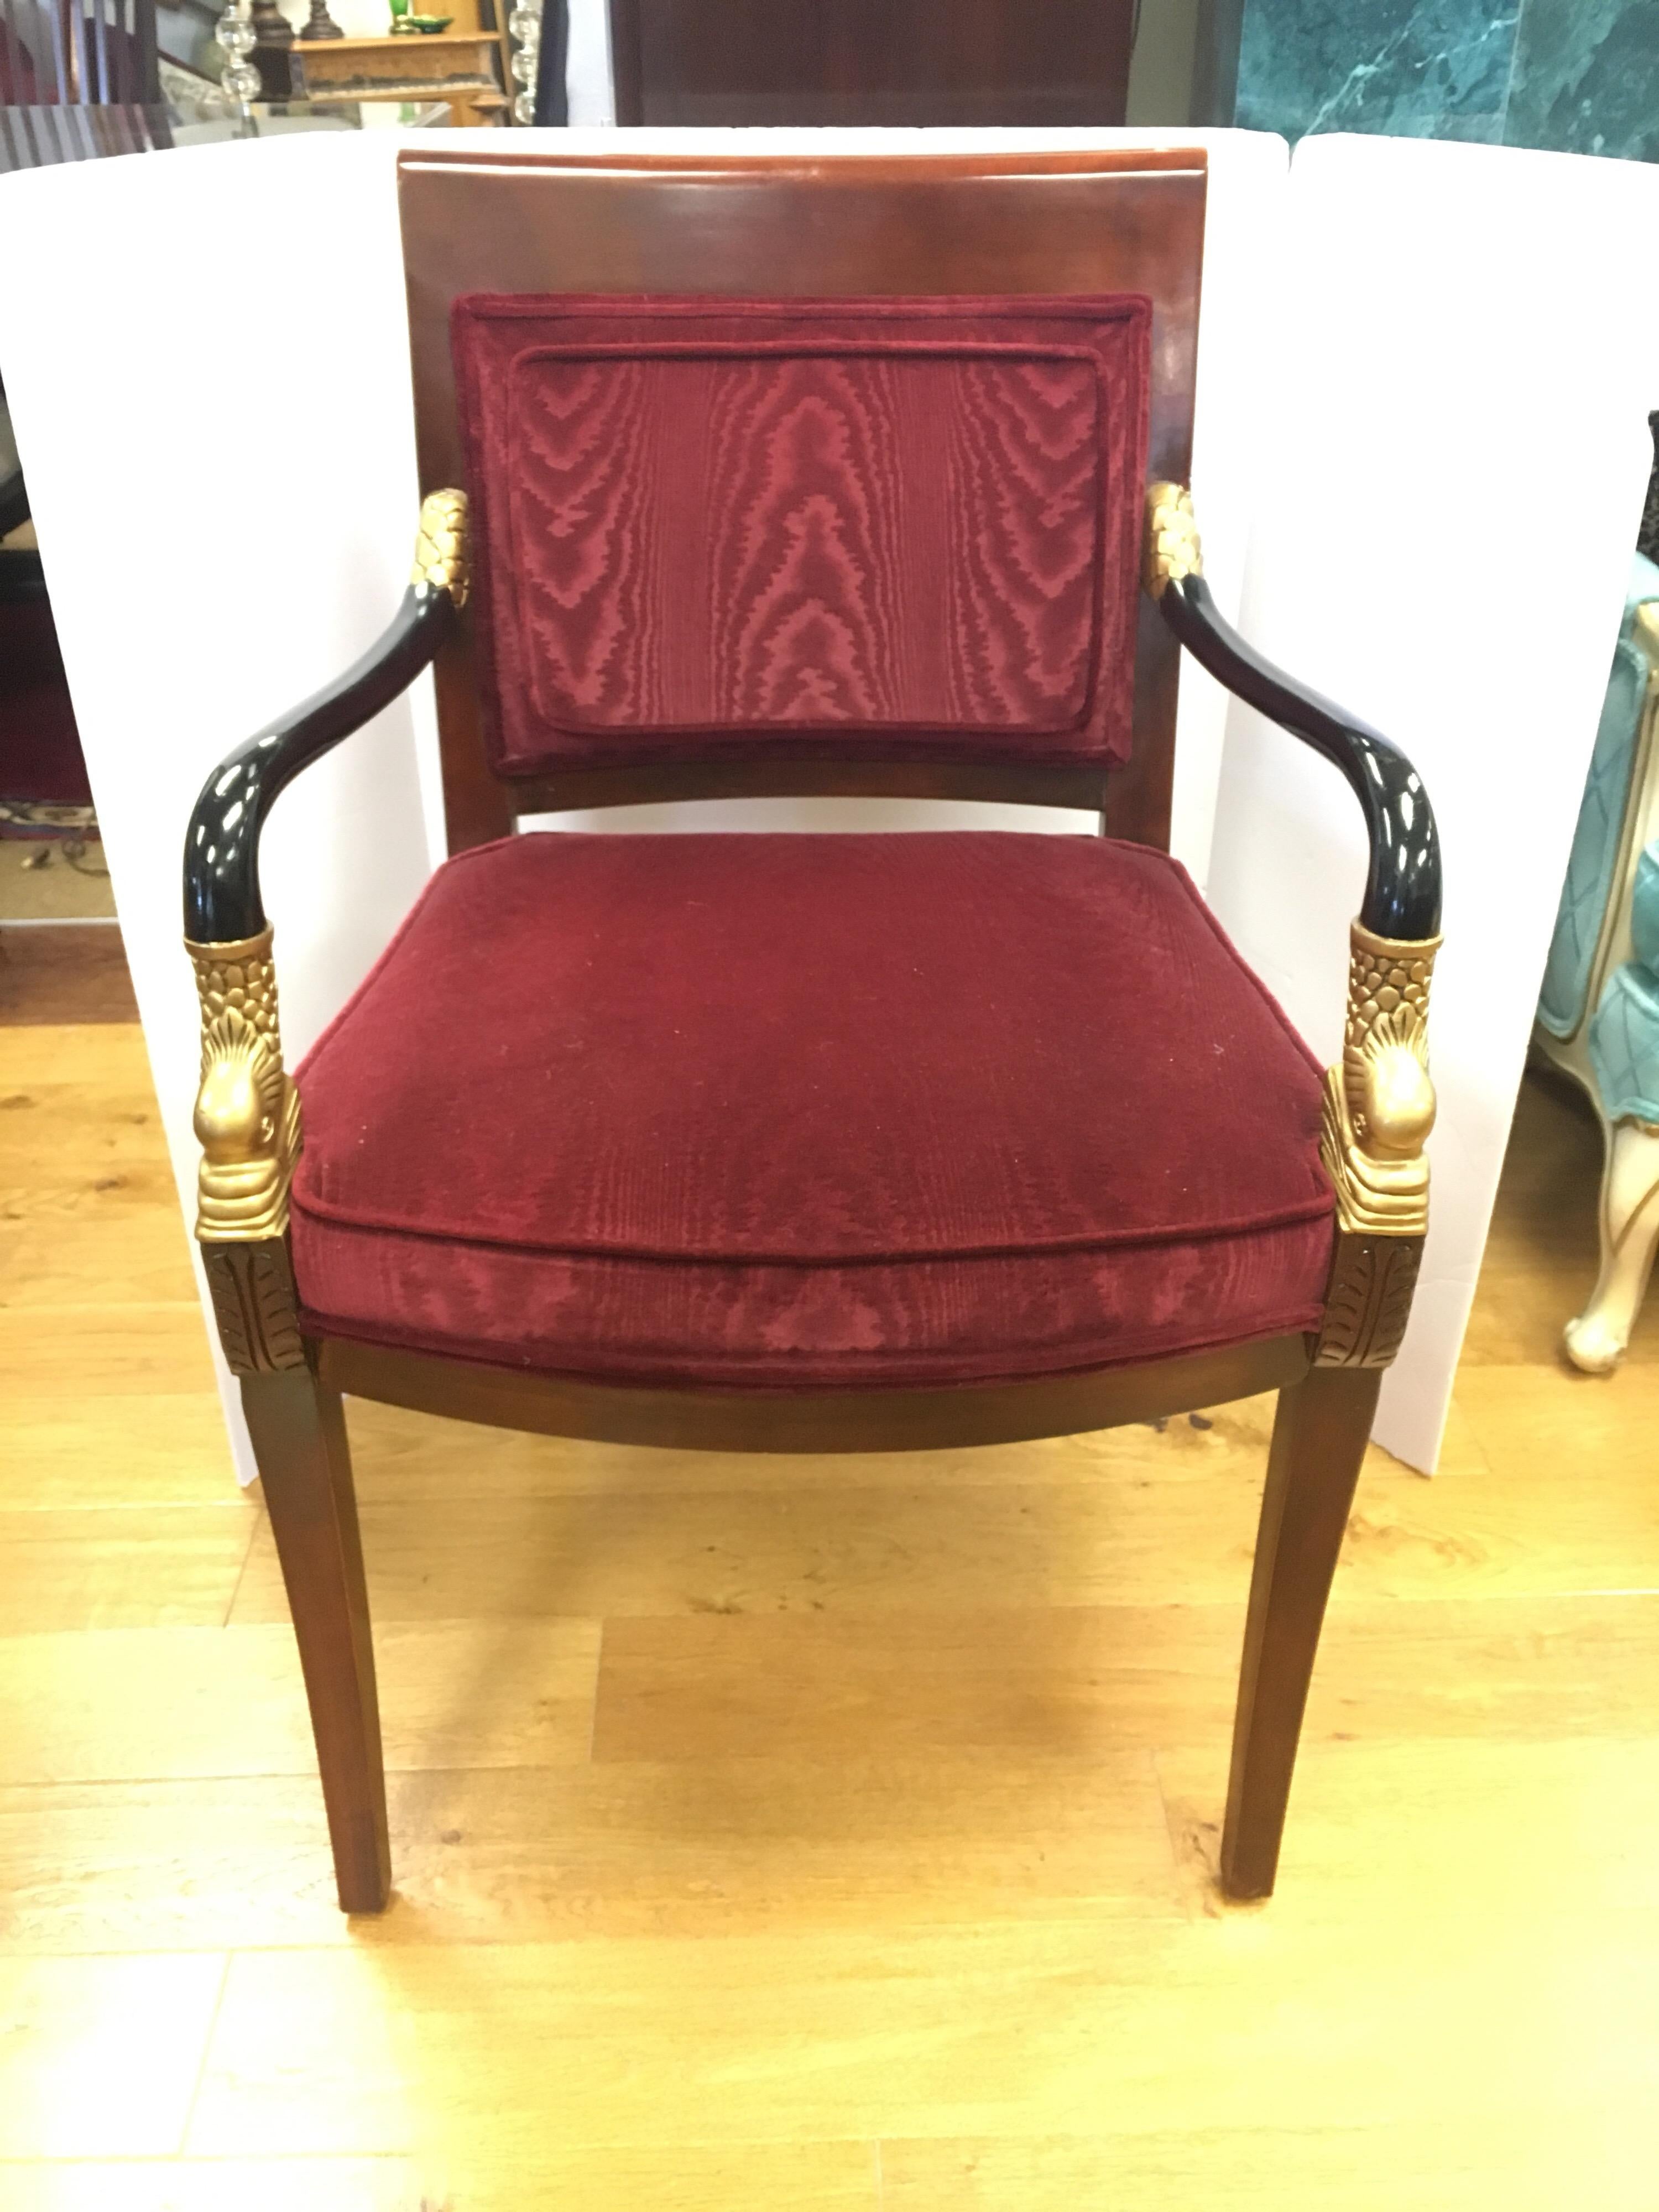 Elegant century furniture Biedermeier armchair upholstered in a burgundy velvet. Features two-tone colored wood (brown and black) with carved gold dolphin heads.